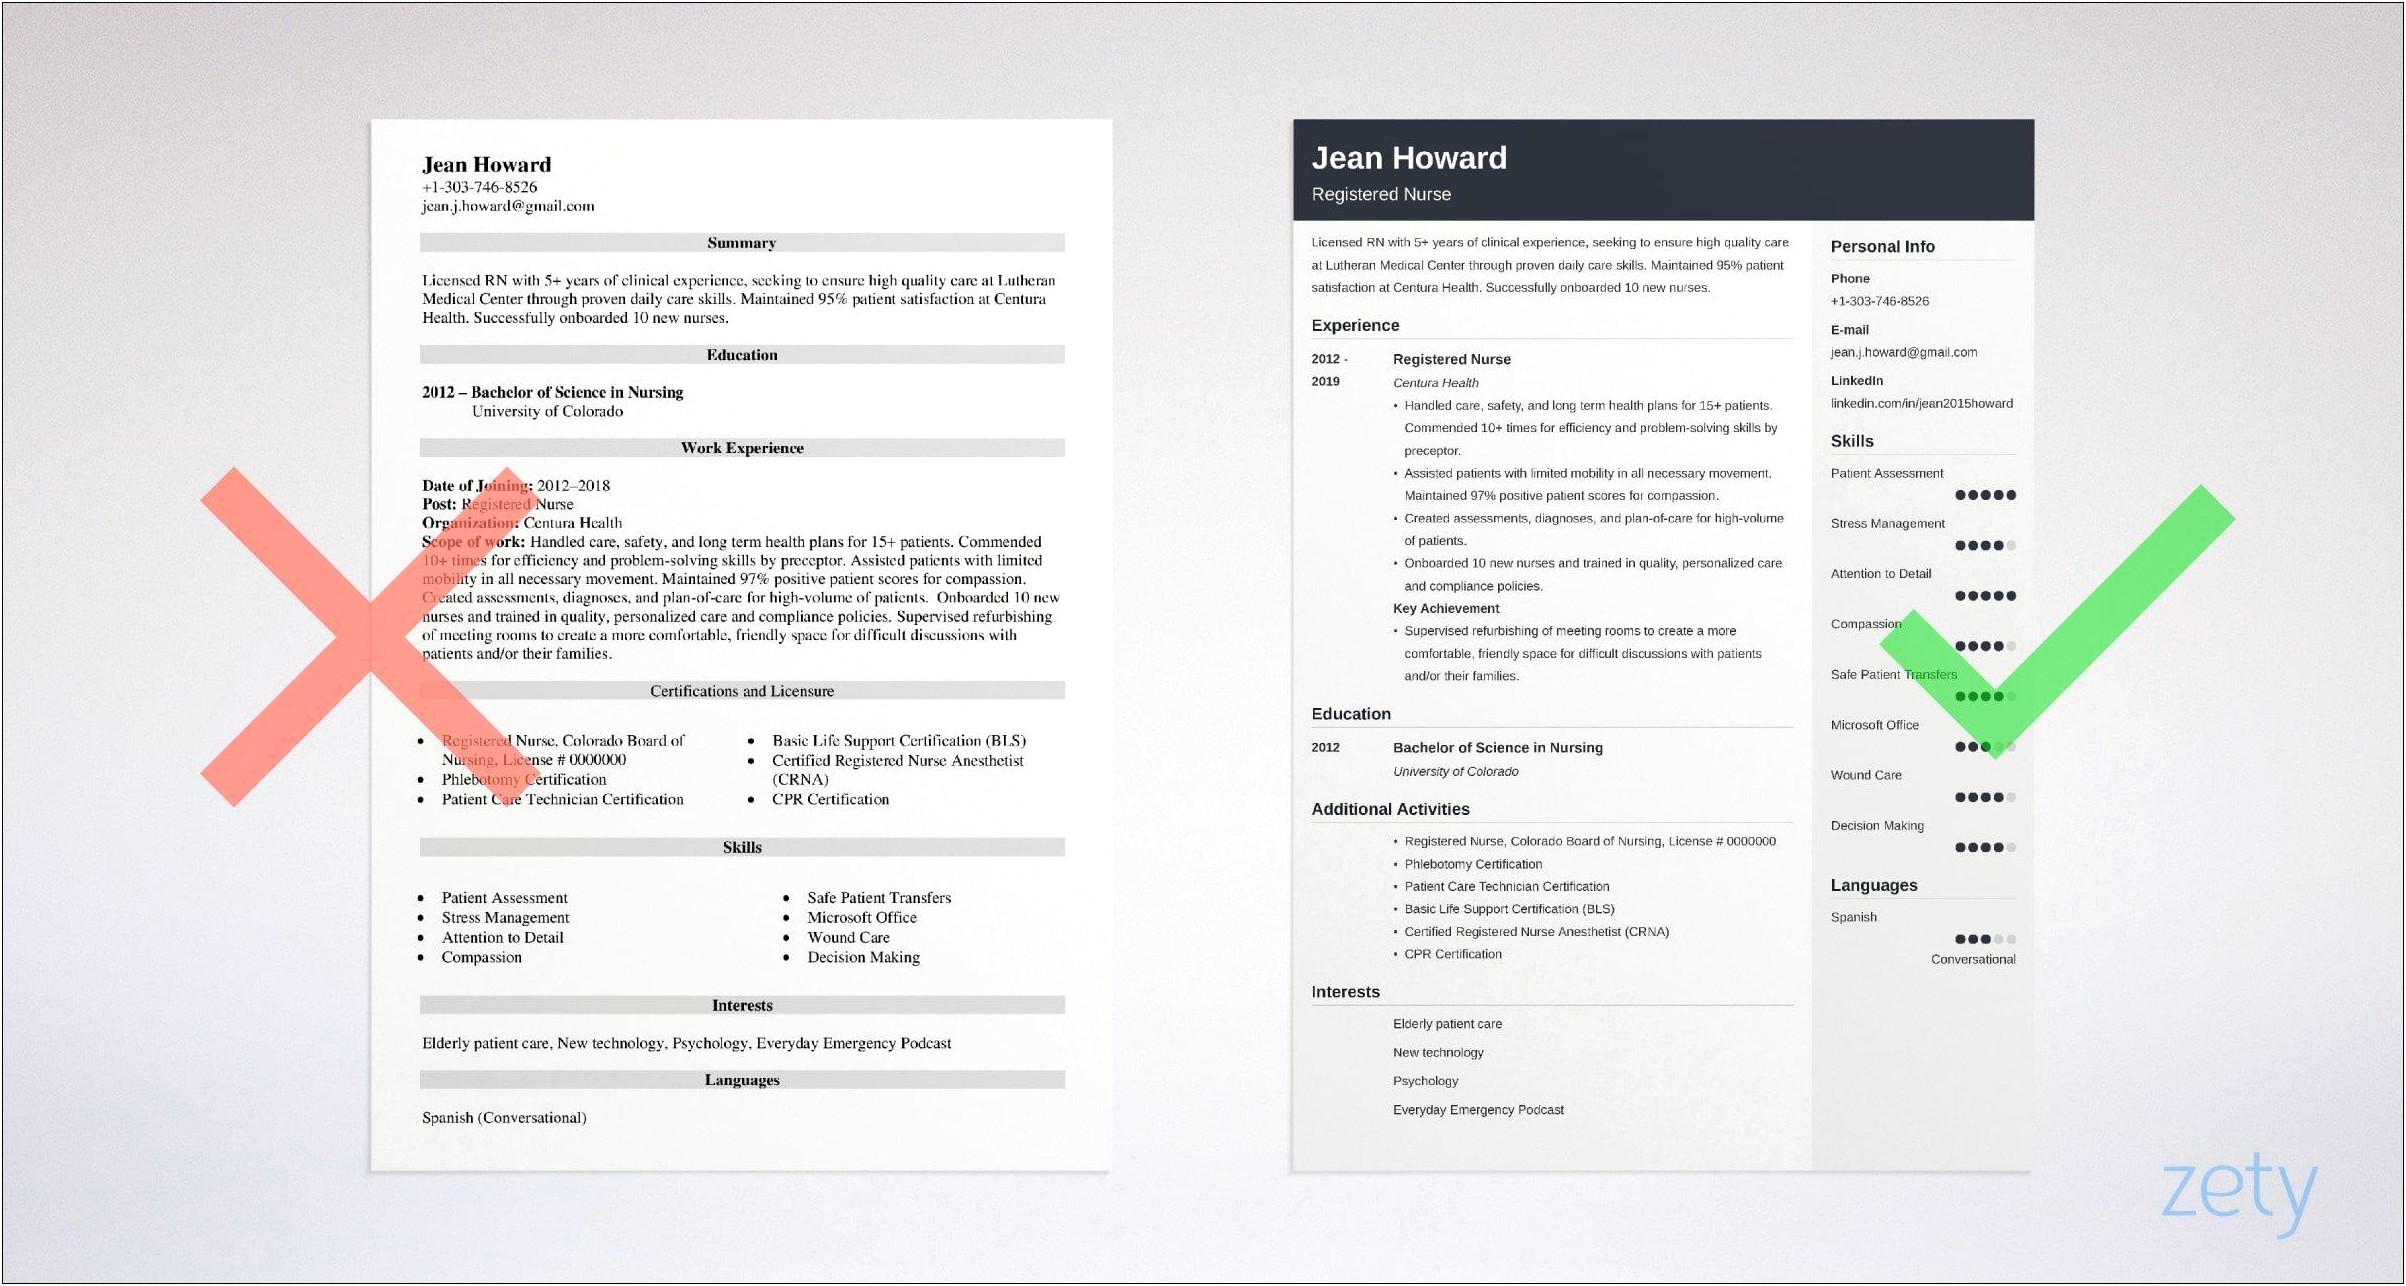 Examples Of Professional Resumes For Nurses